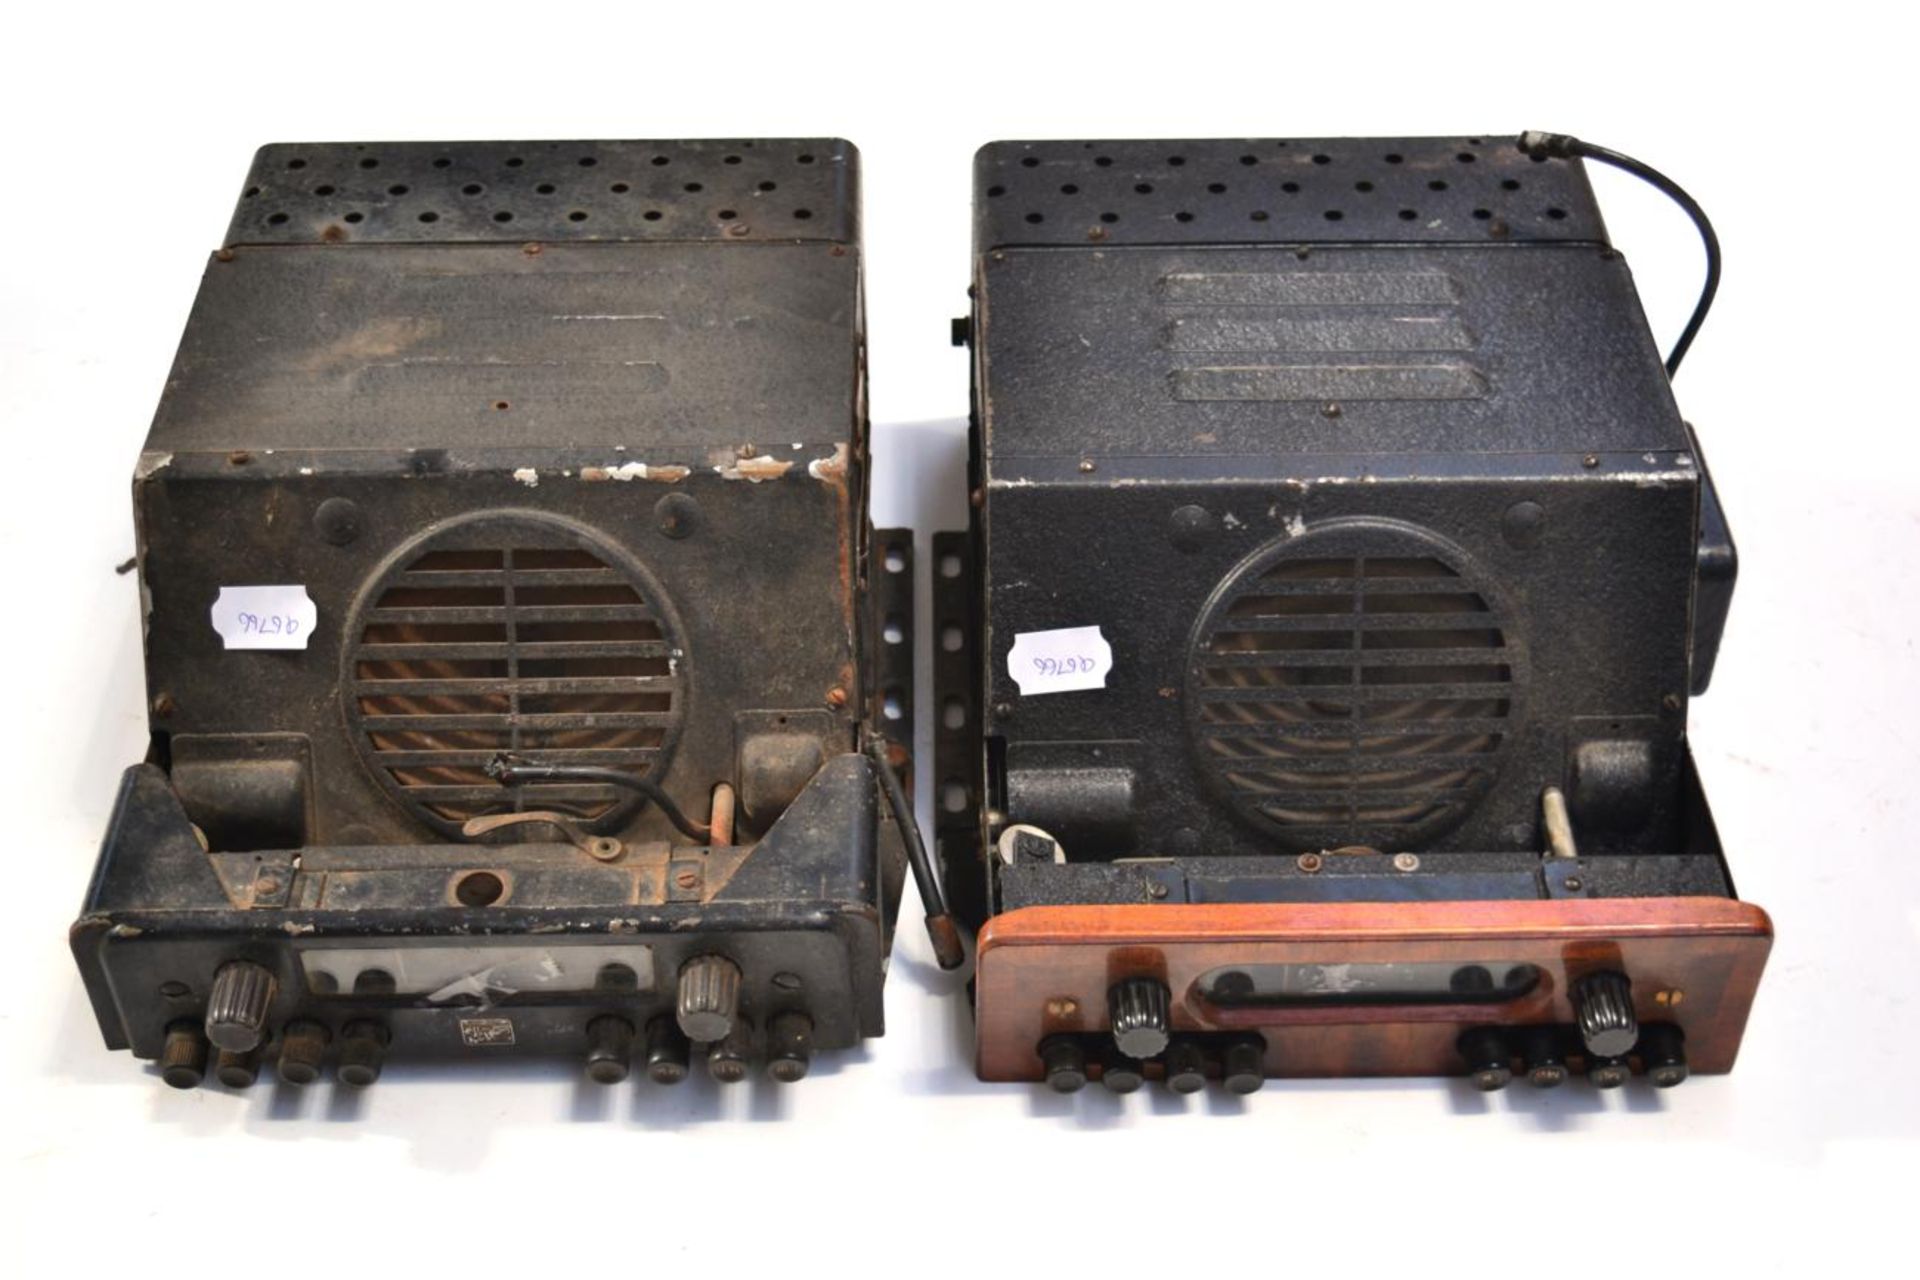 A Vintage HMV Car Radio, removed from a Bentley, labelled Radio Mobile L6d, serial no.4241, model